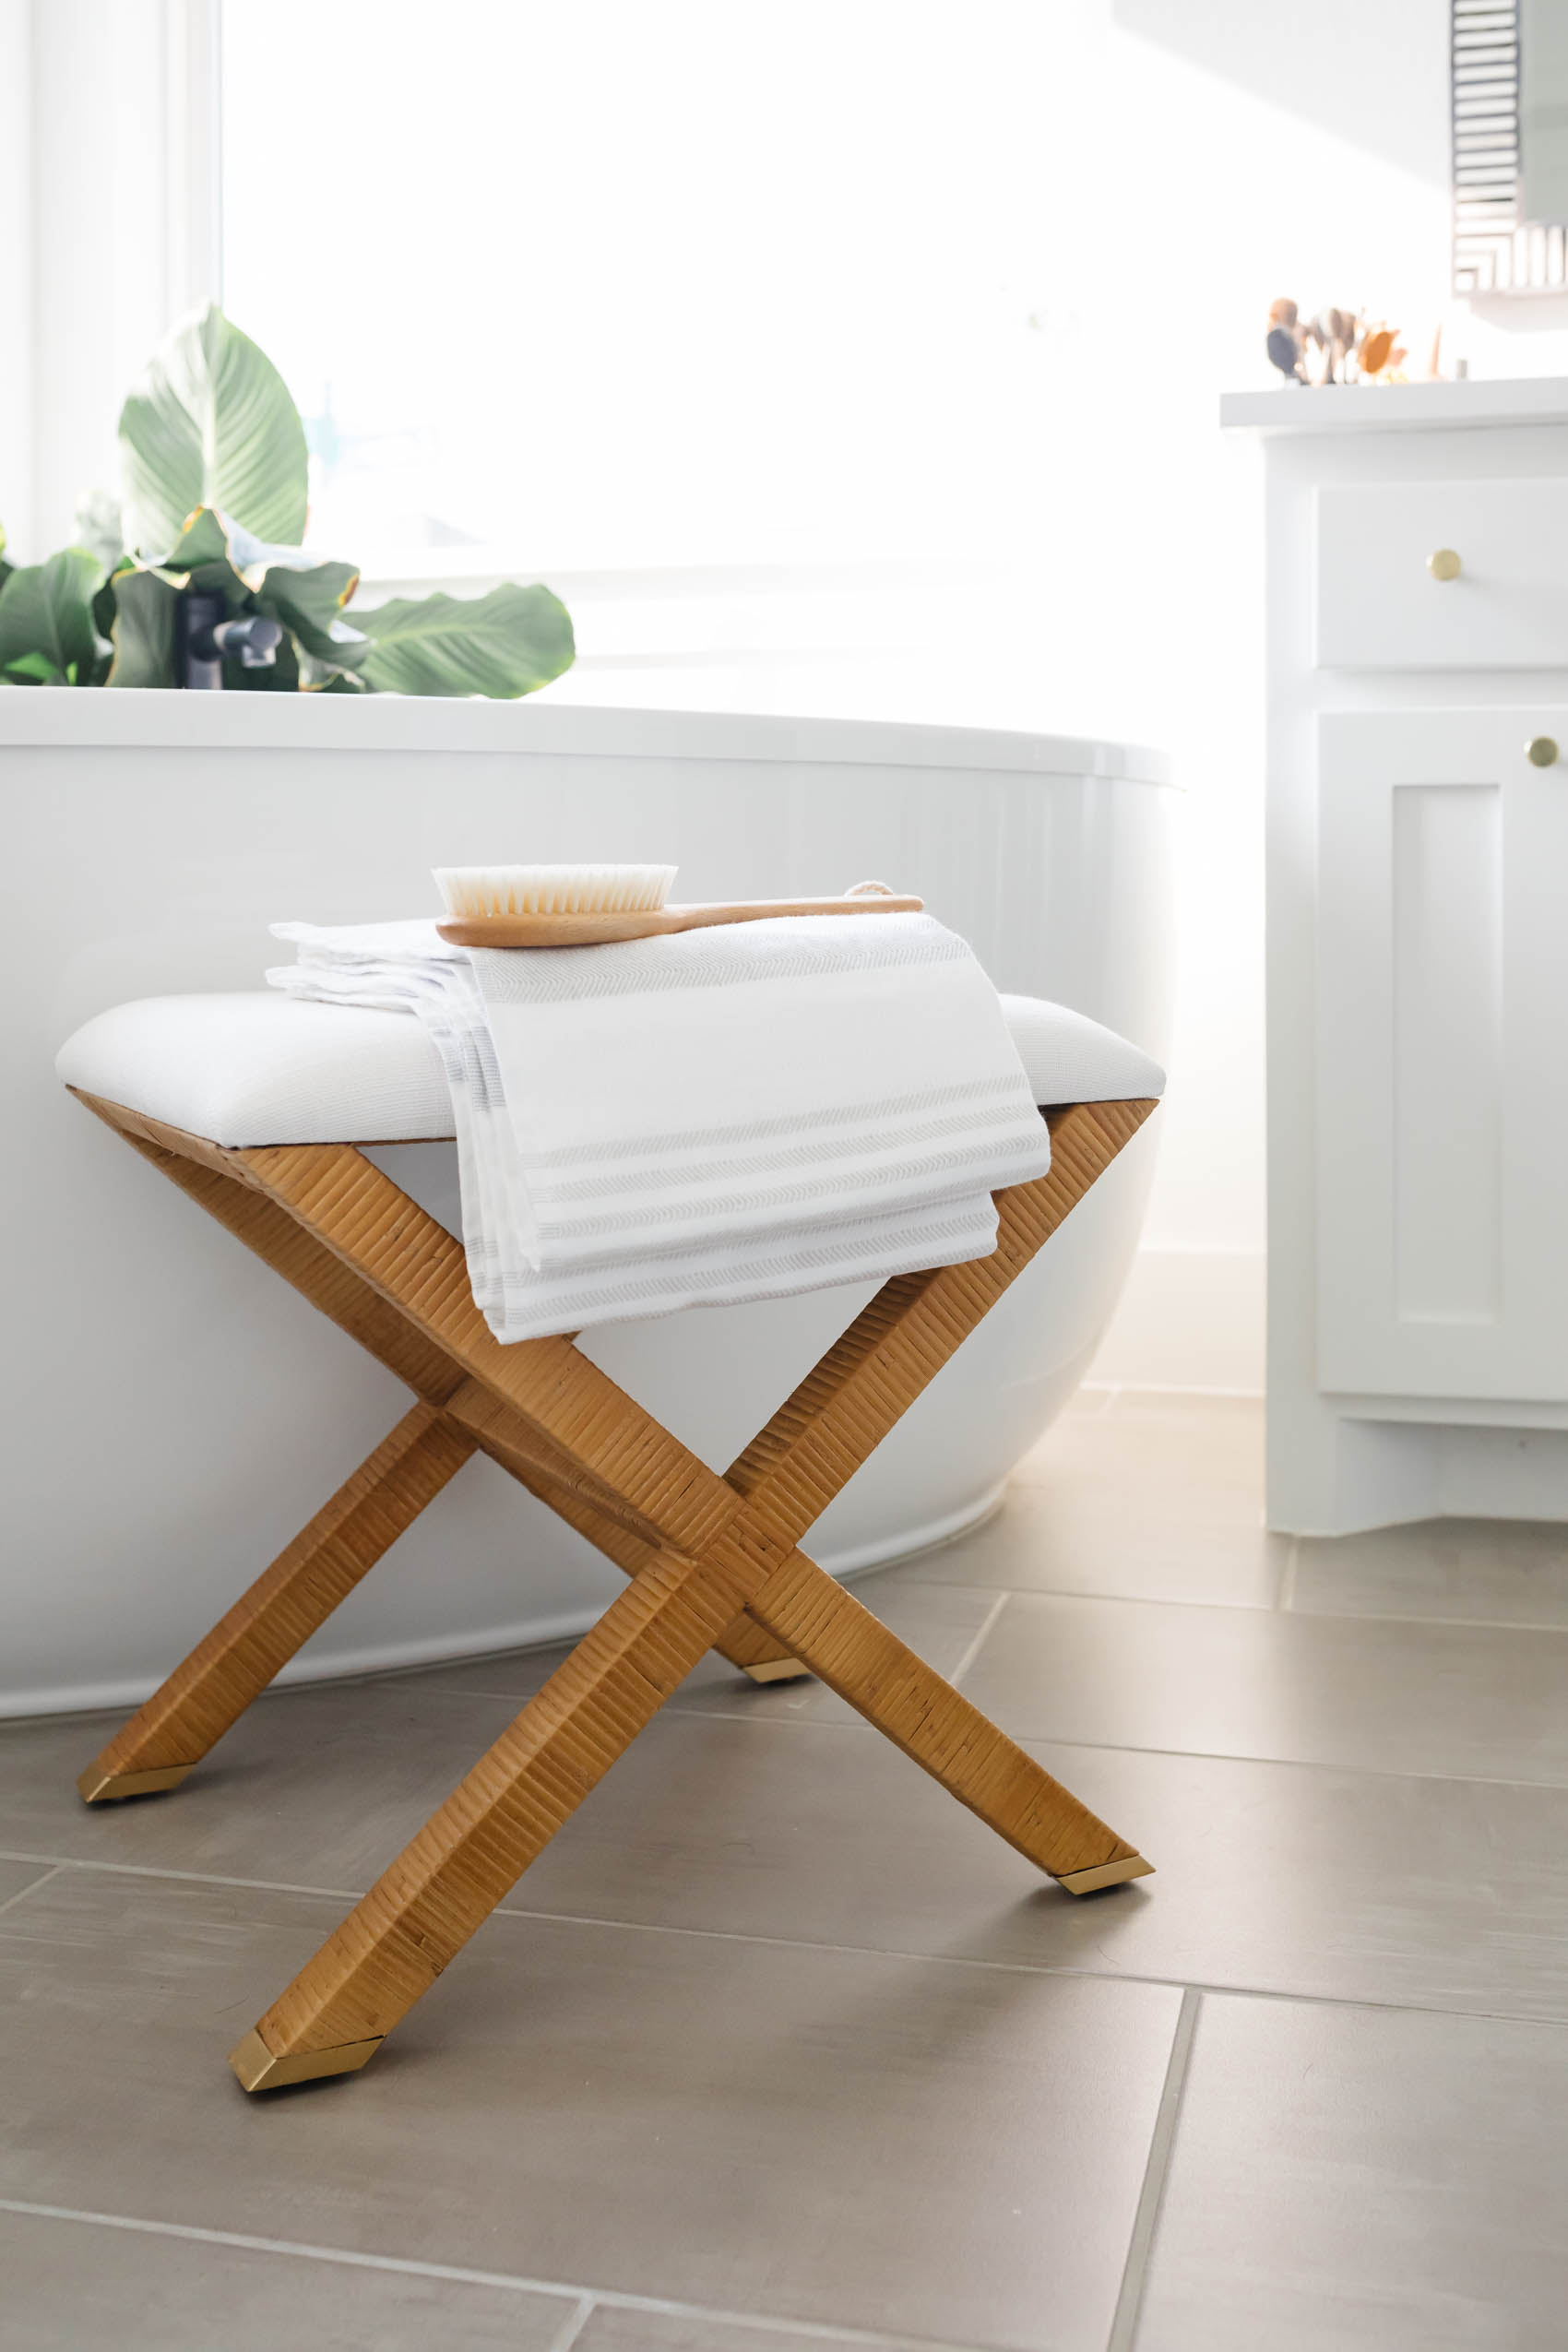 Serena & Lily Balboa X Base stool with luxury bathroom accessories in a white transitional bathroom